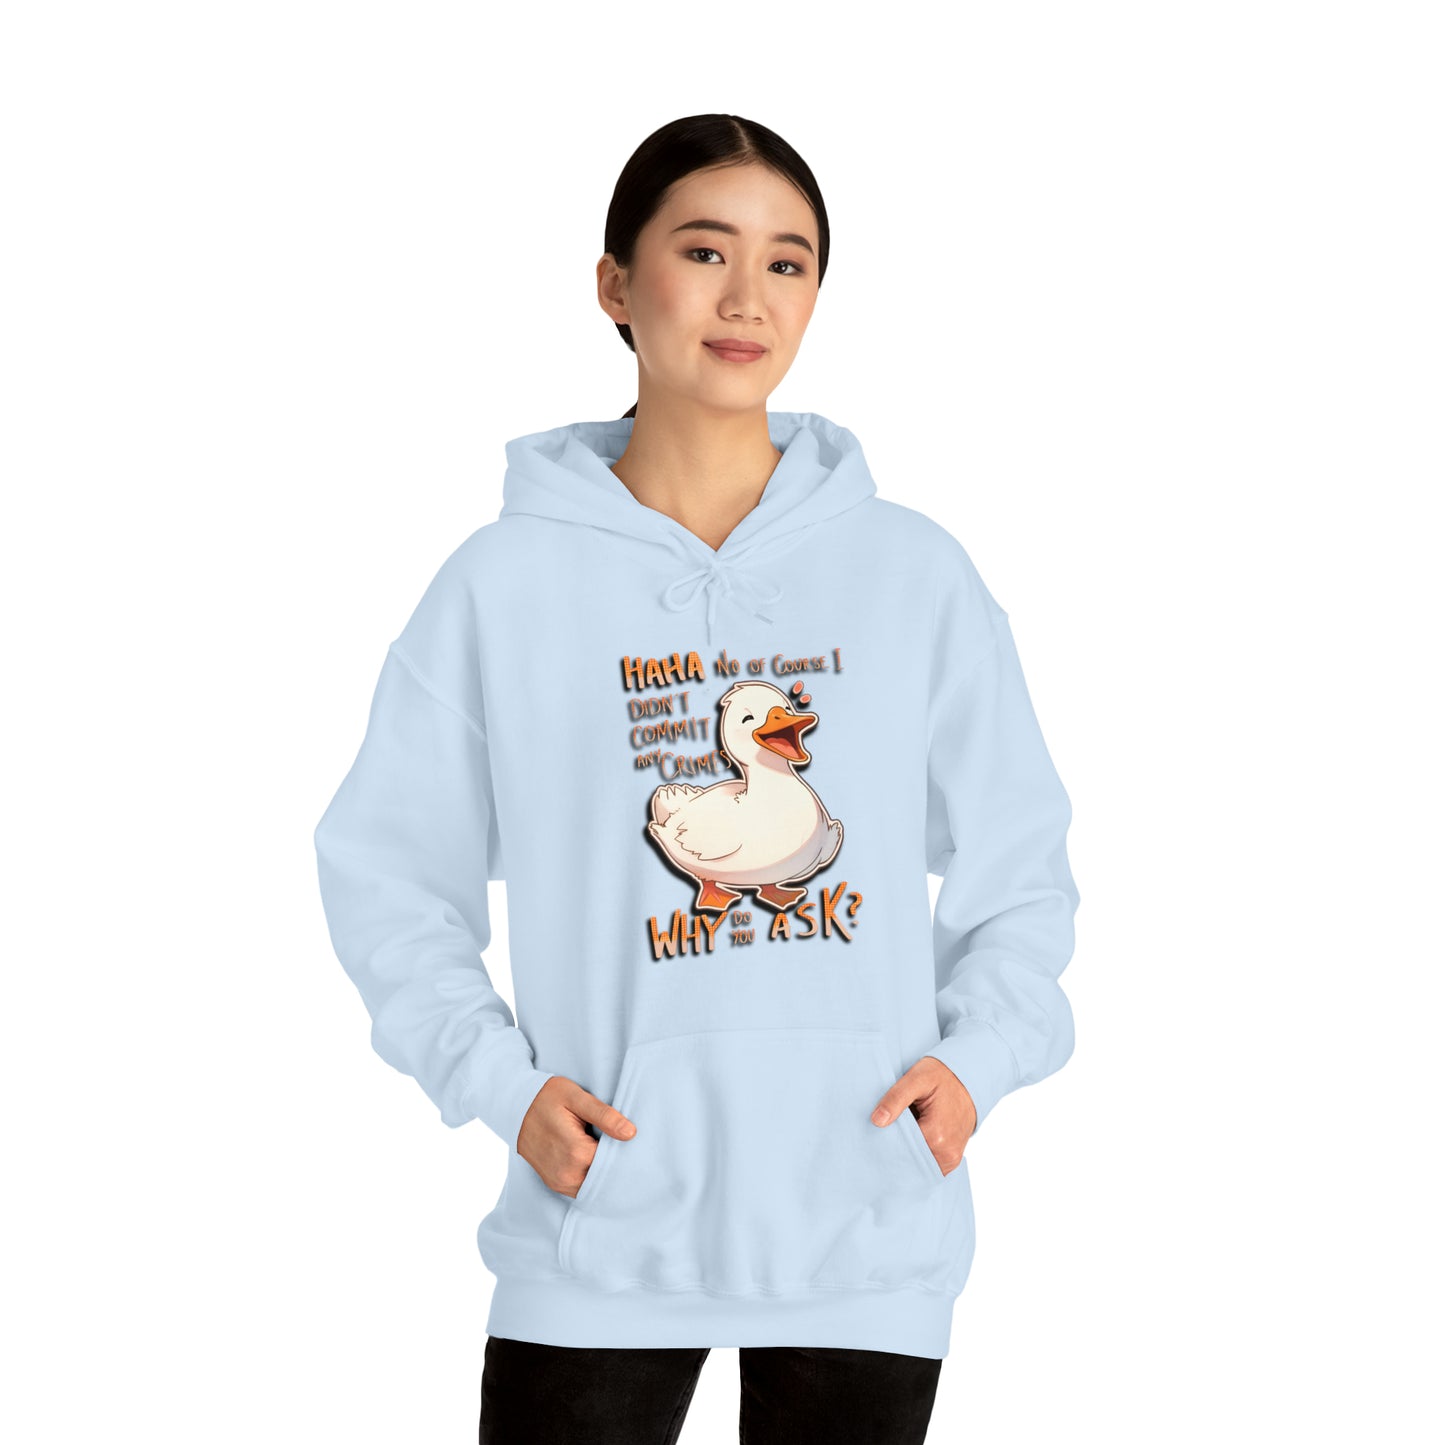 Haha No Of Course I Didn't Commit Any Crimes Why Do You Ask Nervous Duck Unisex Hooded Sweatshirt